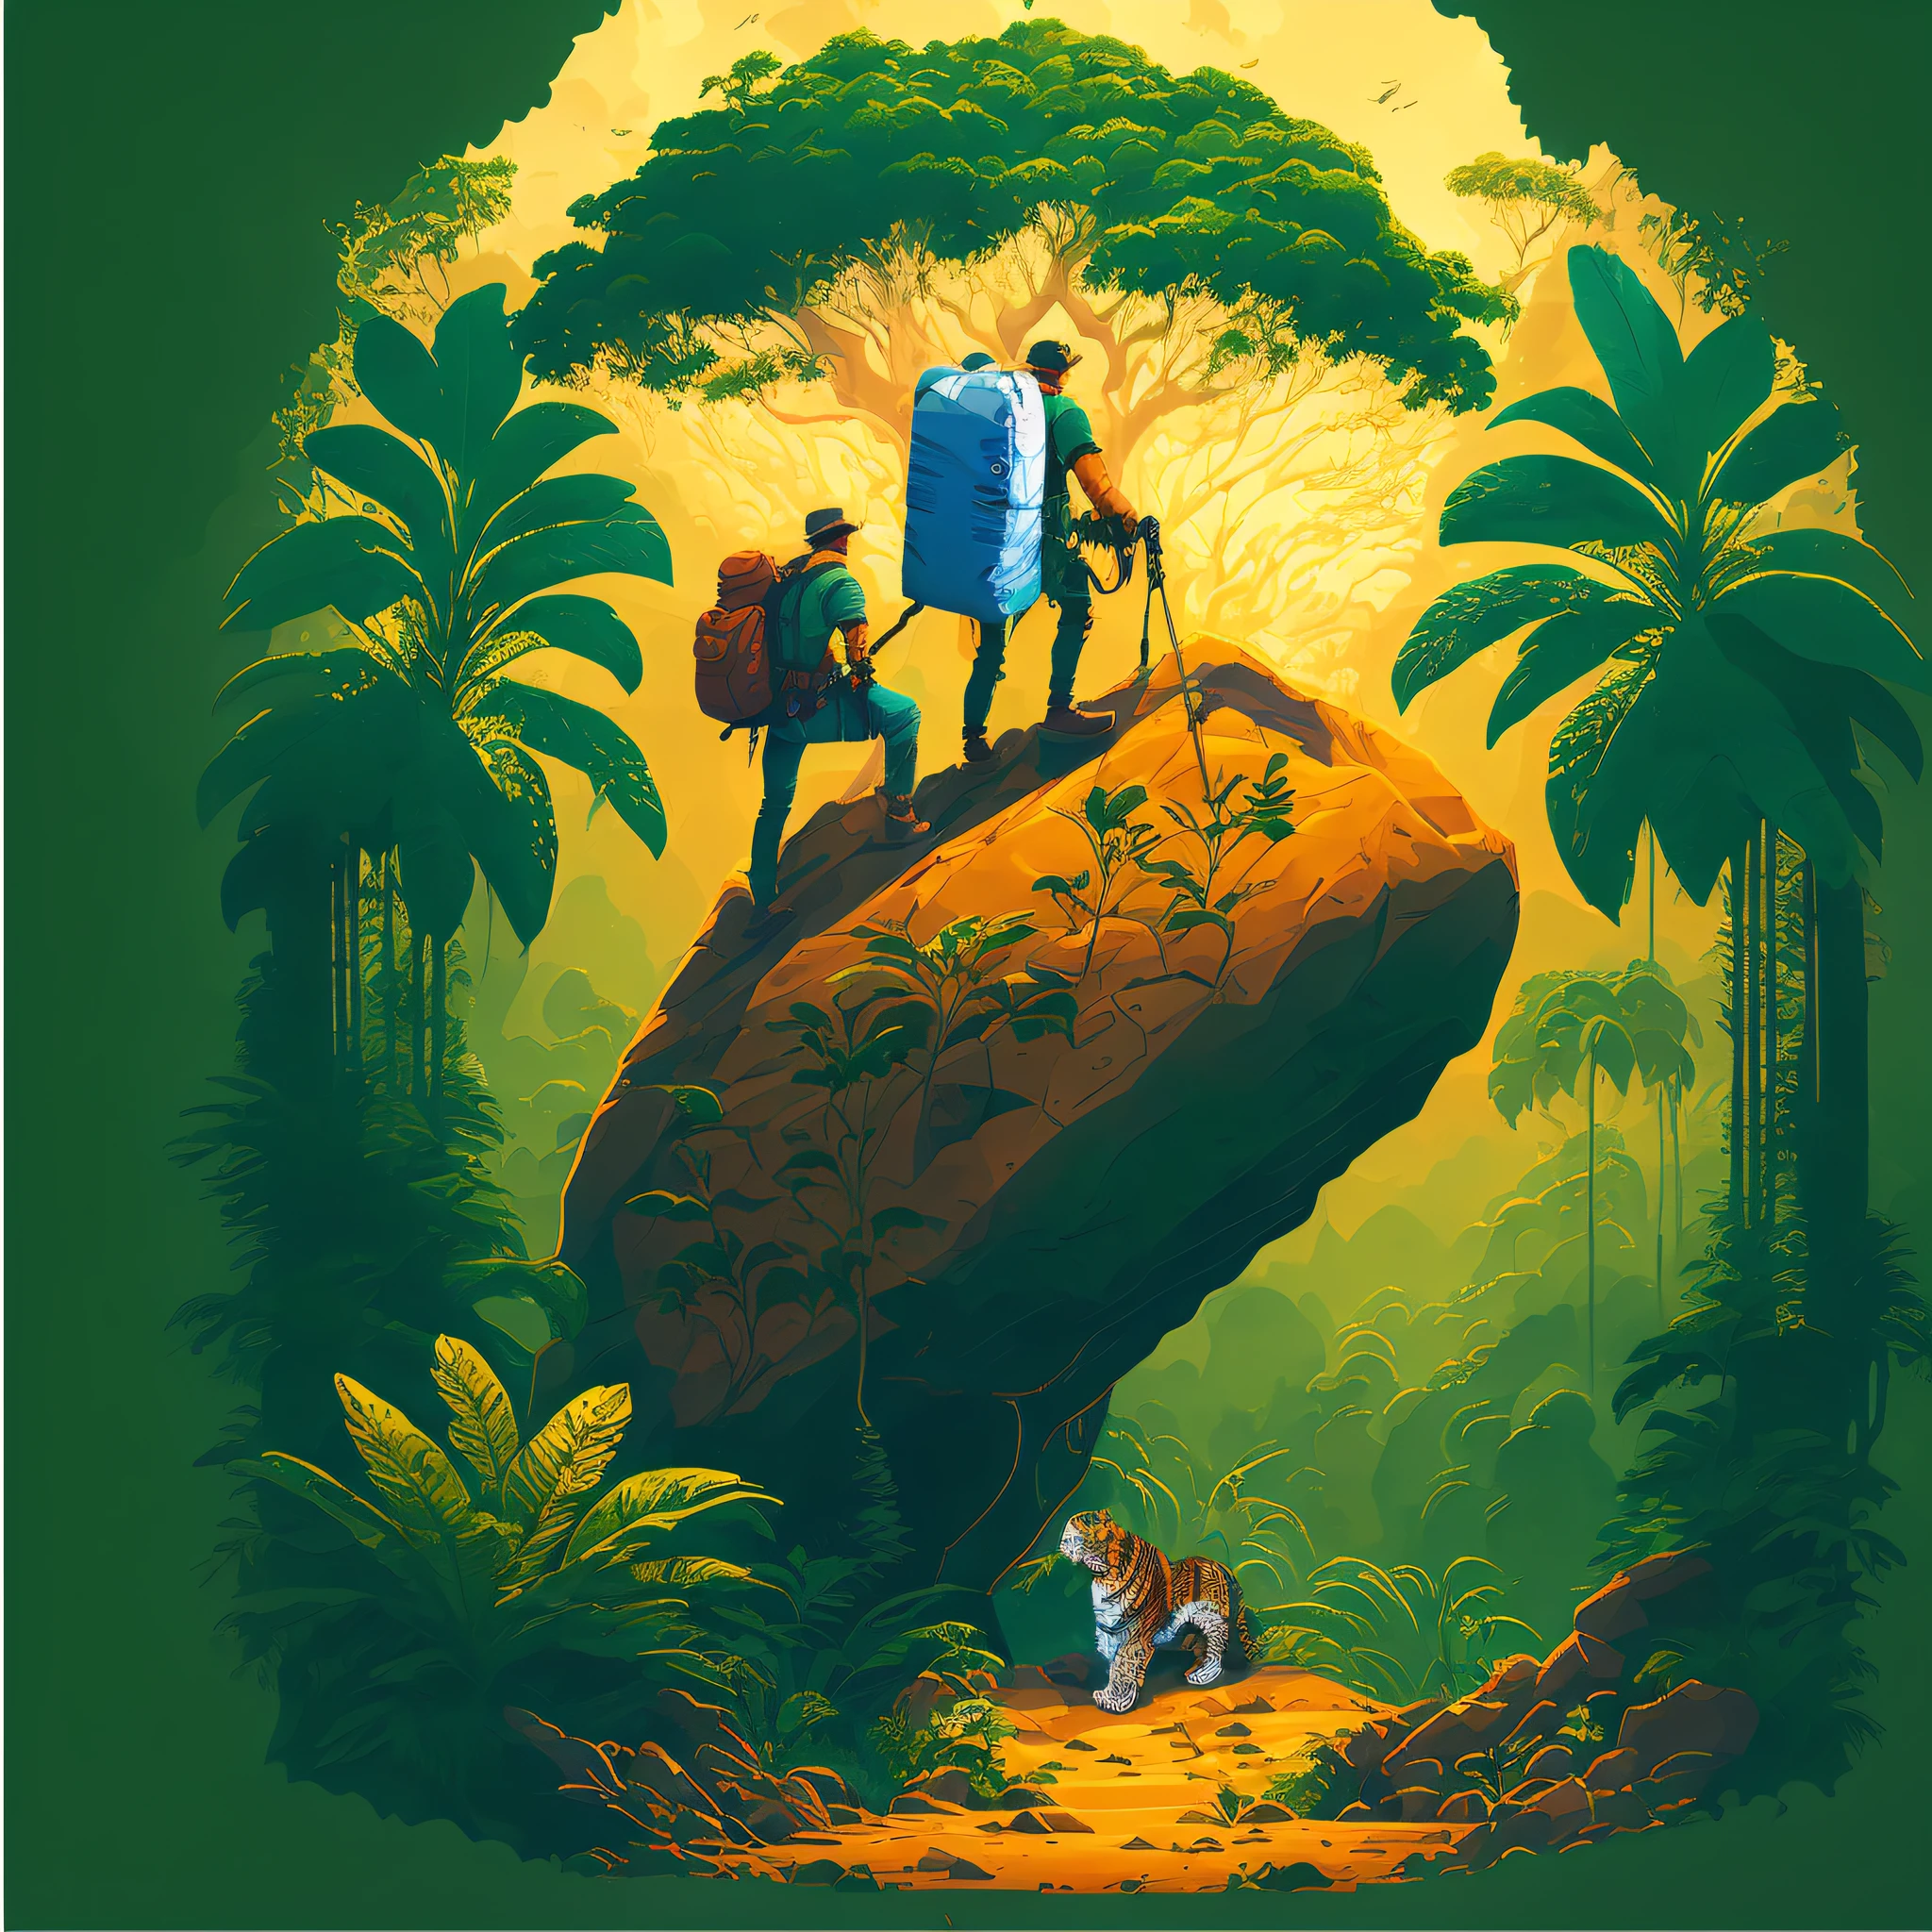 there are two people on a rock with a backpack and a tiger, jen bartel, cyril rolando and m.w kaluta, poster illustration, cyril rolando and m. w kaluta, cyril rolando and goro fujita, by Justin Gerard, inspired by Tim and Greg Hildebrandt, inspired by Brothers Hildebrandt